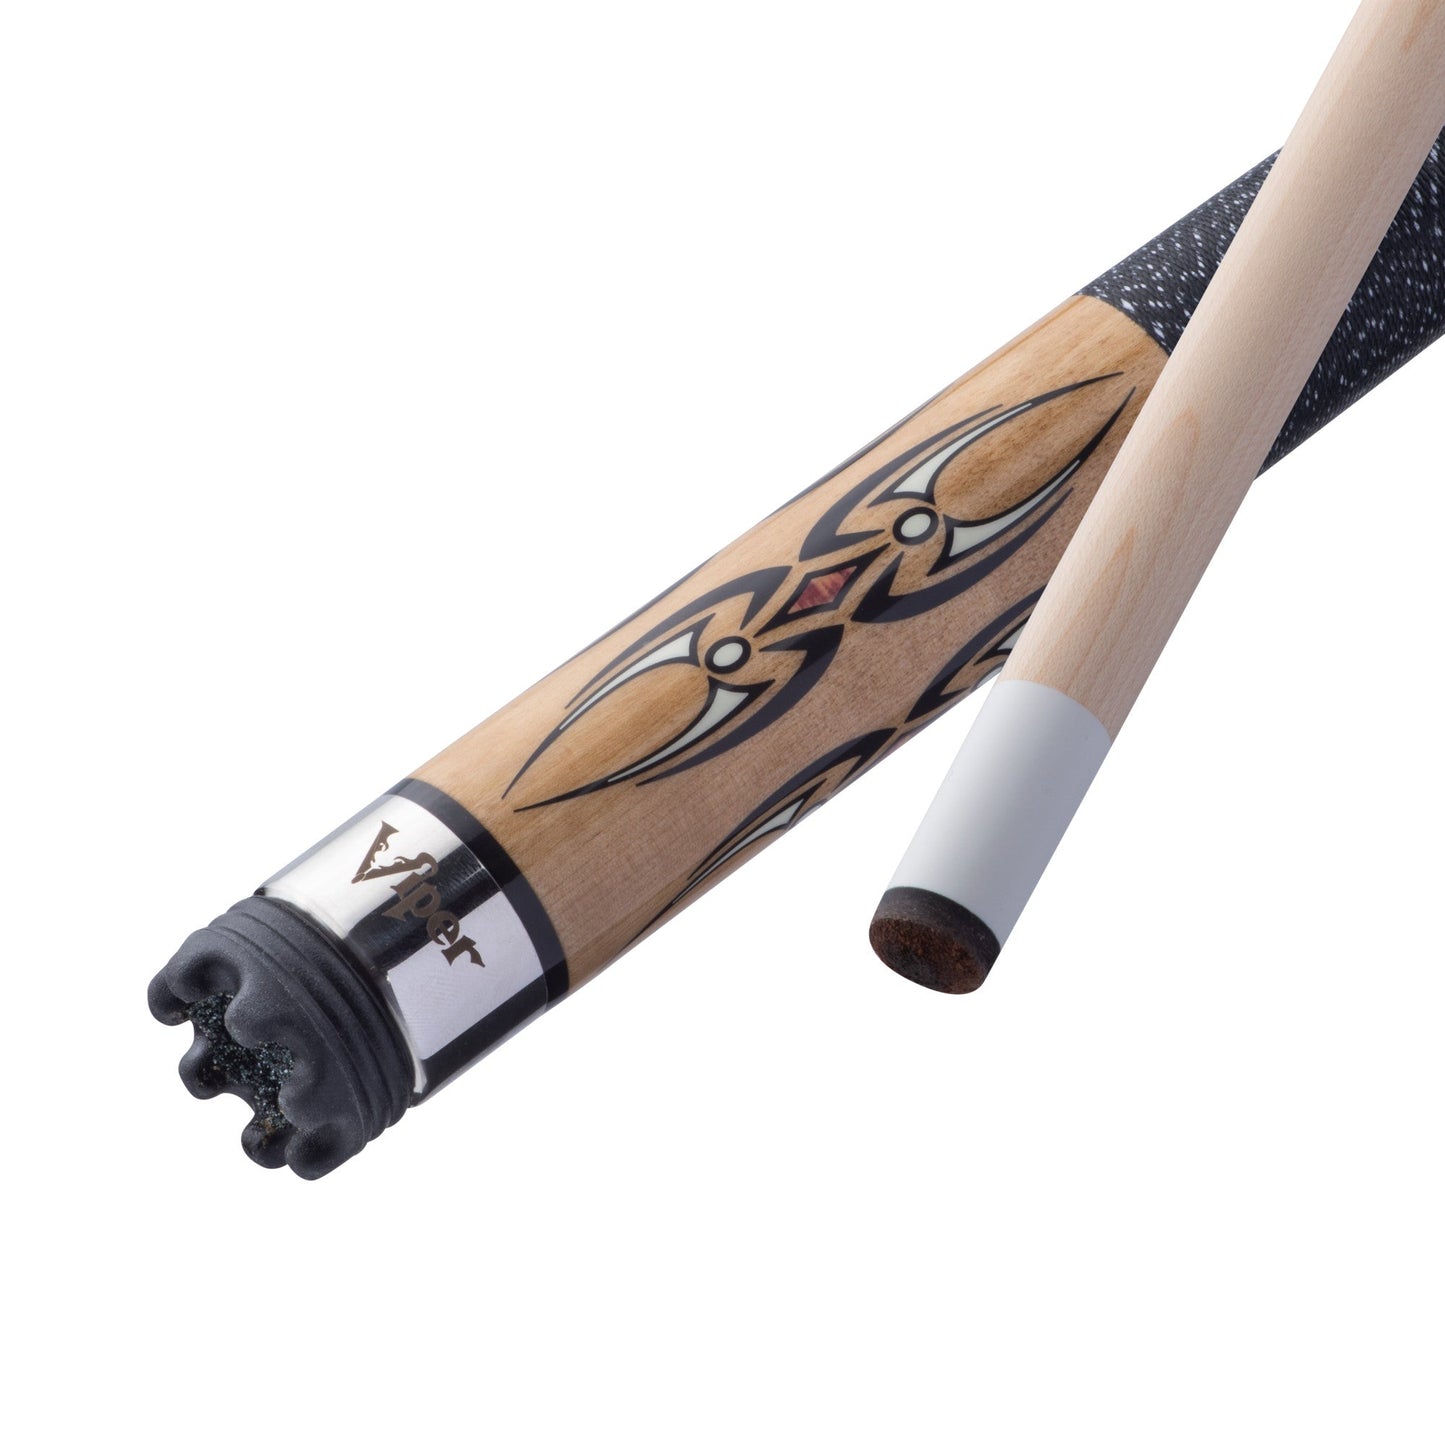 Viper Sinister Black and White Wrap 18oz Pool Cue